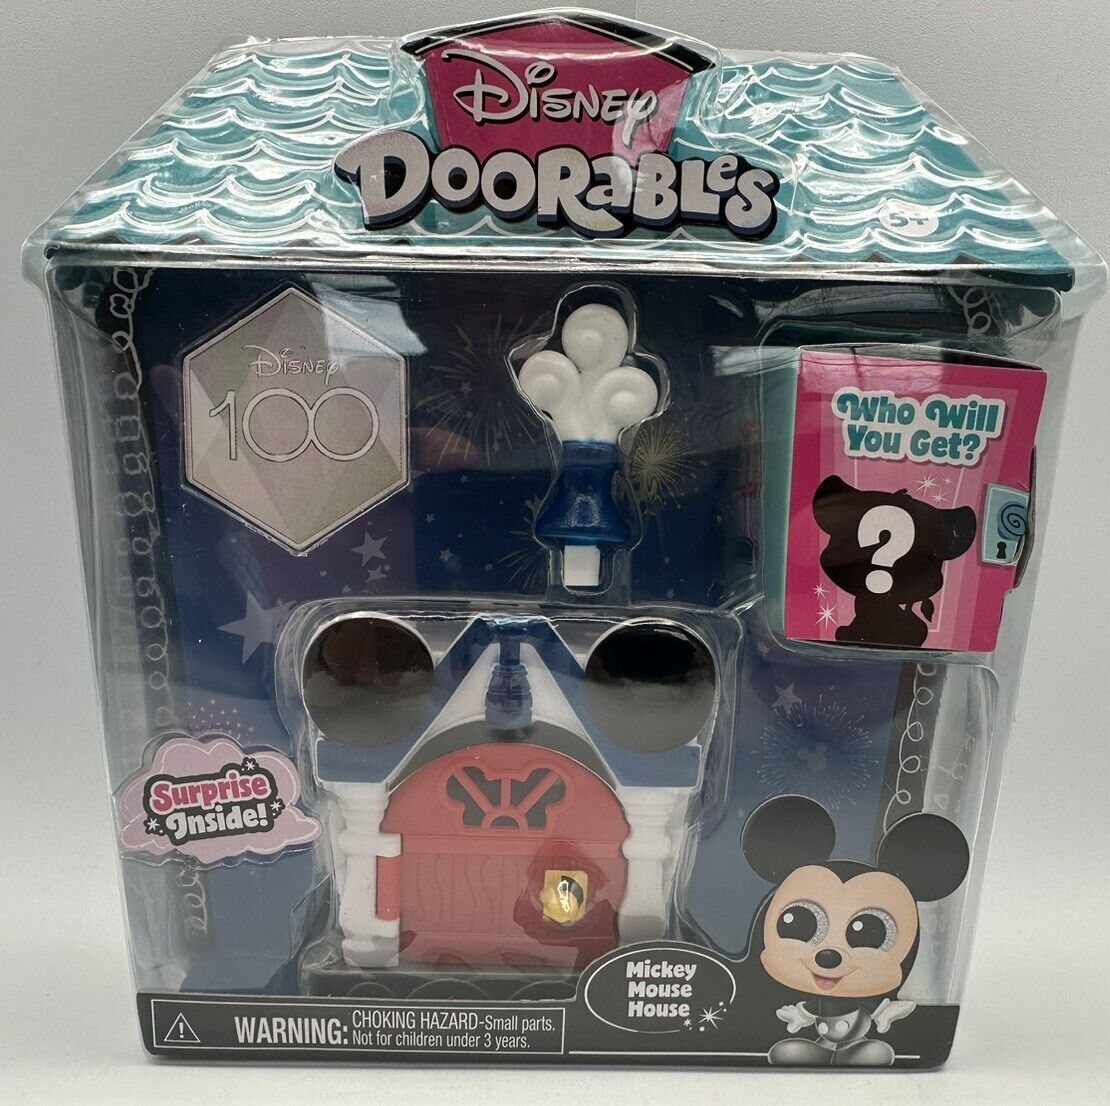 Disney Doorables Mickey Mouse House Surprise Inside Collectible Mix Match